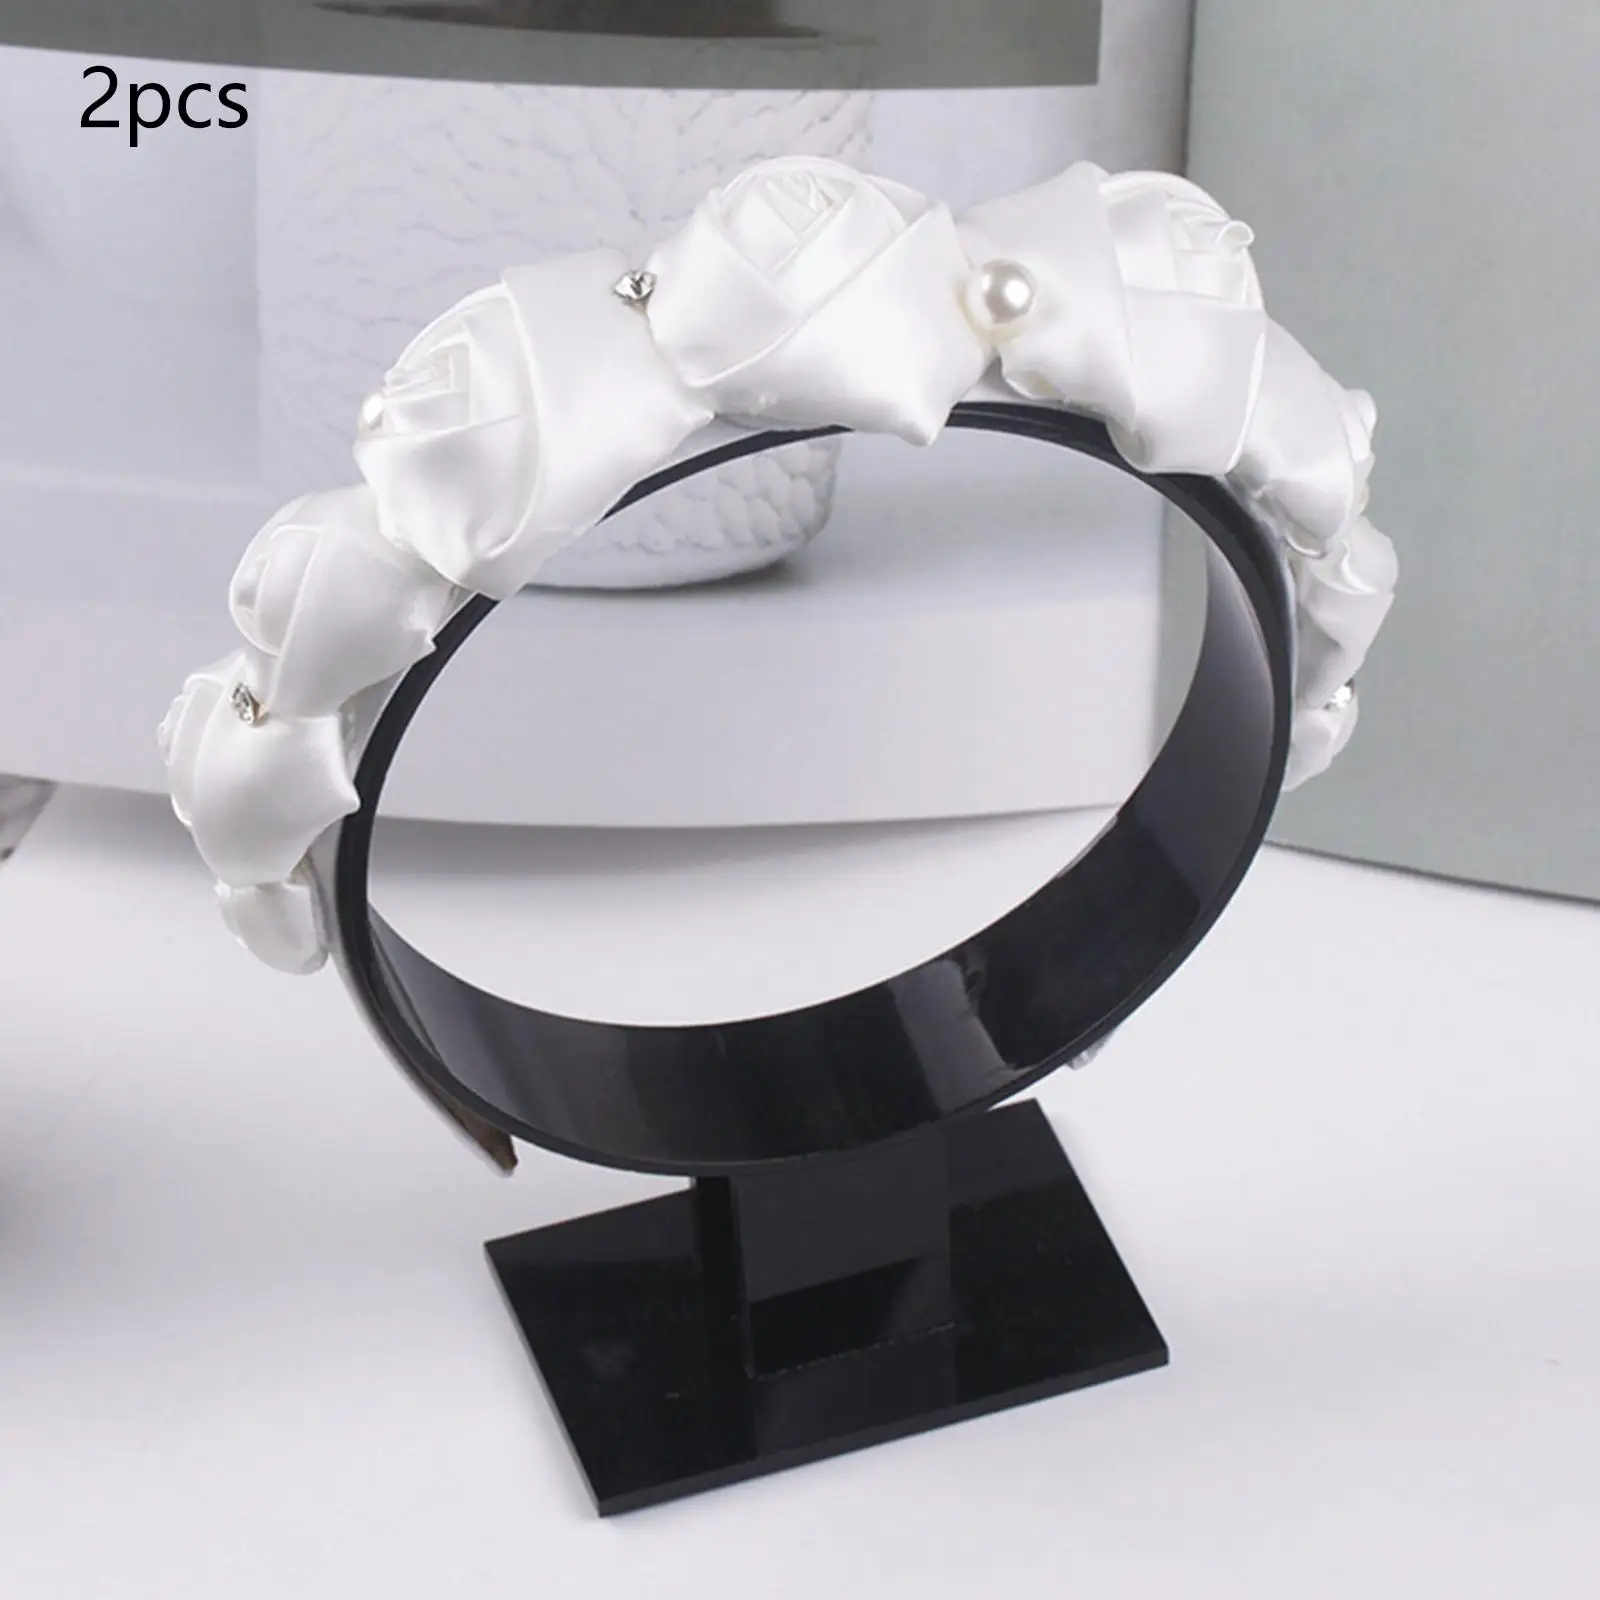 2 Pieces Single Headband Display Stand Accessories Gifts Acrylic Rack Headwear Holder Hair Hoop Holder for Store Retail Women